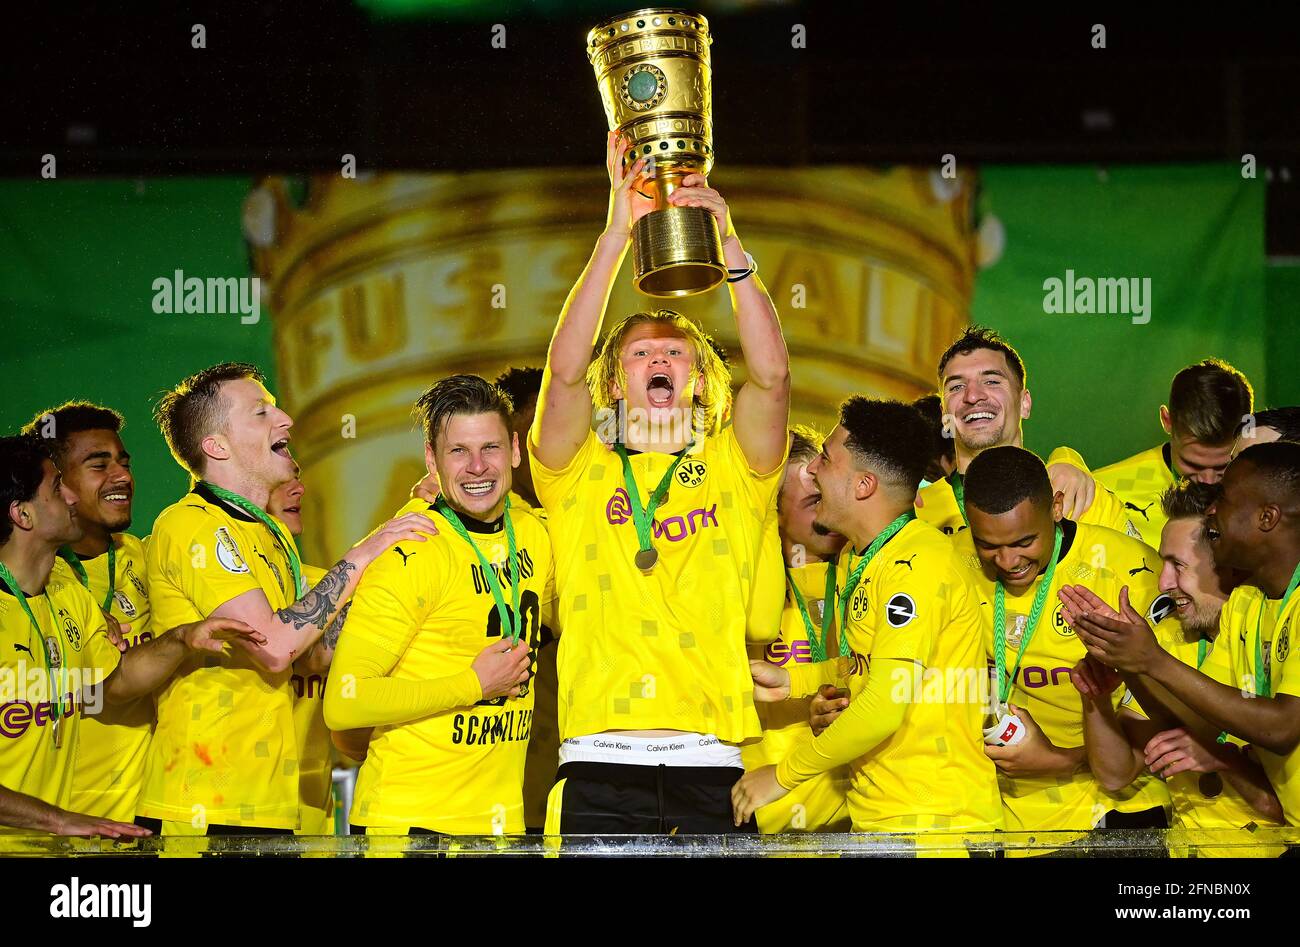 Team photo, team, team, team photo - Erling HAALAND (DO) with cup, cup,  trophy, jubilation, joy, enthusiasm, award ceremony. 78th DFB Cup Final, RB  Leipzig (L) - Borussia Dortmund (DO) 1-4, in